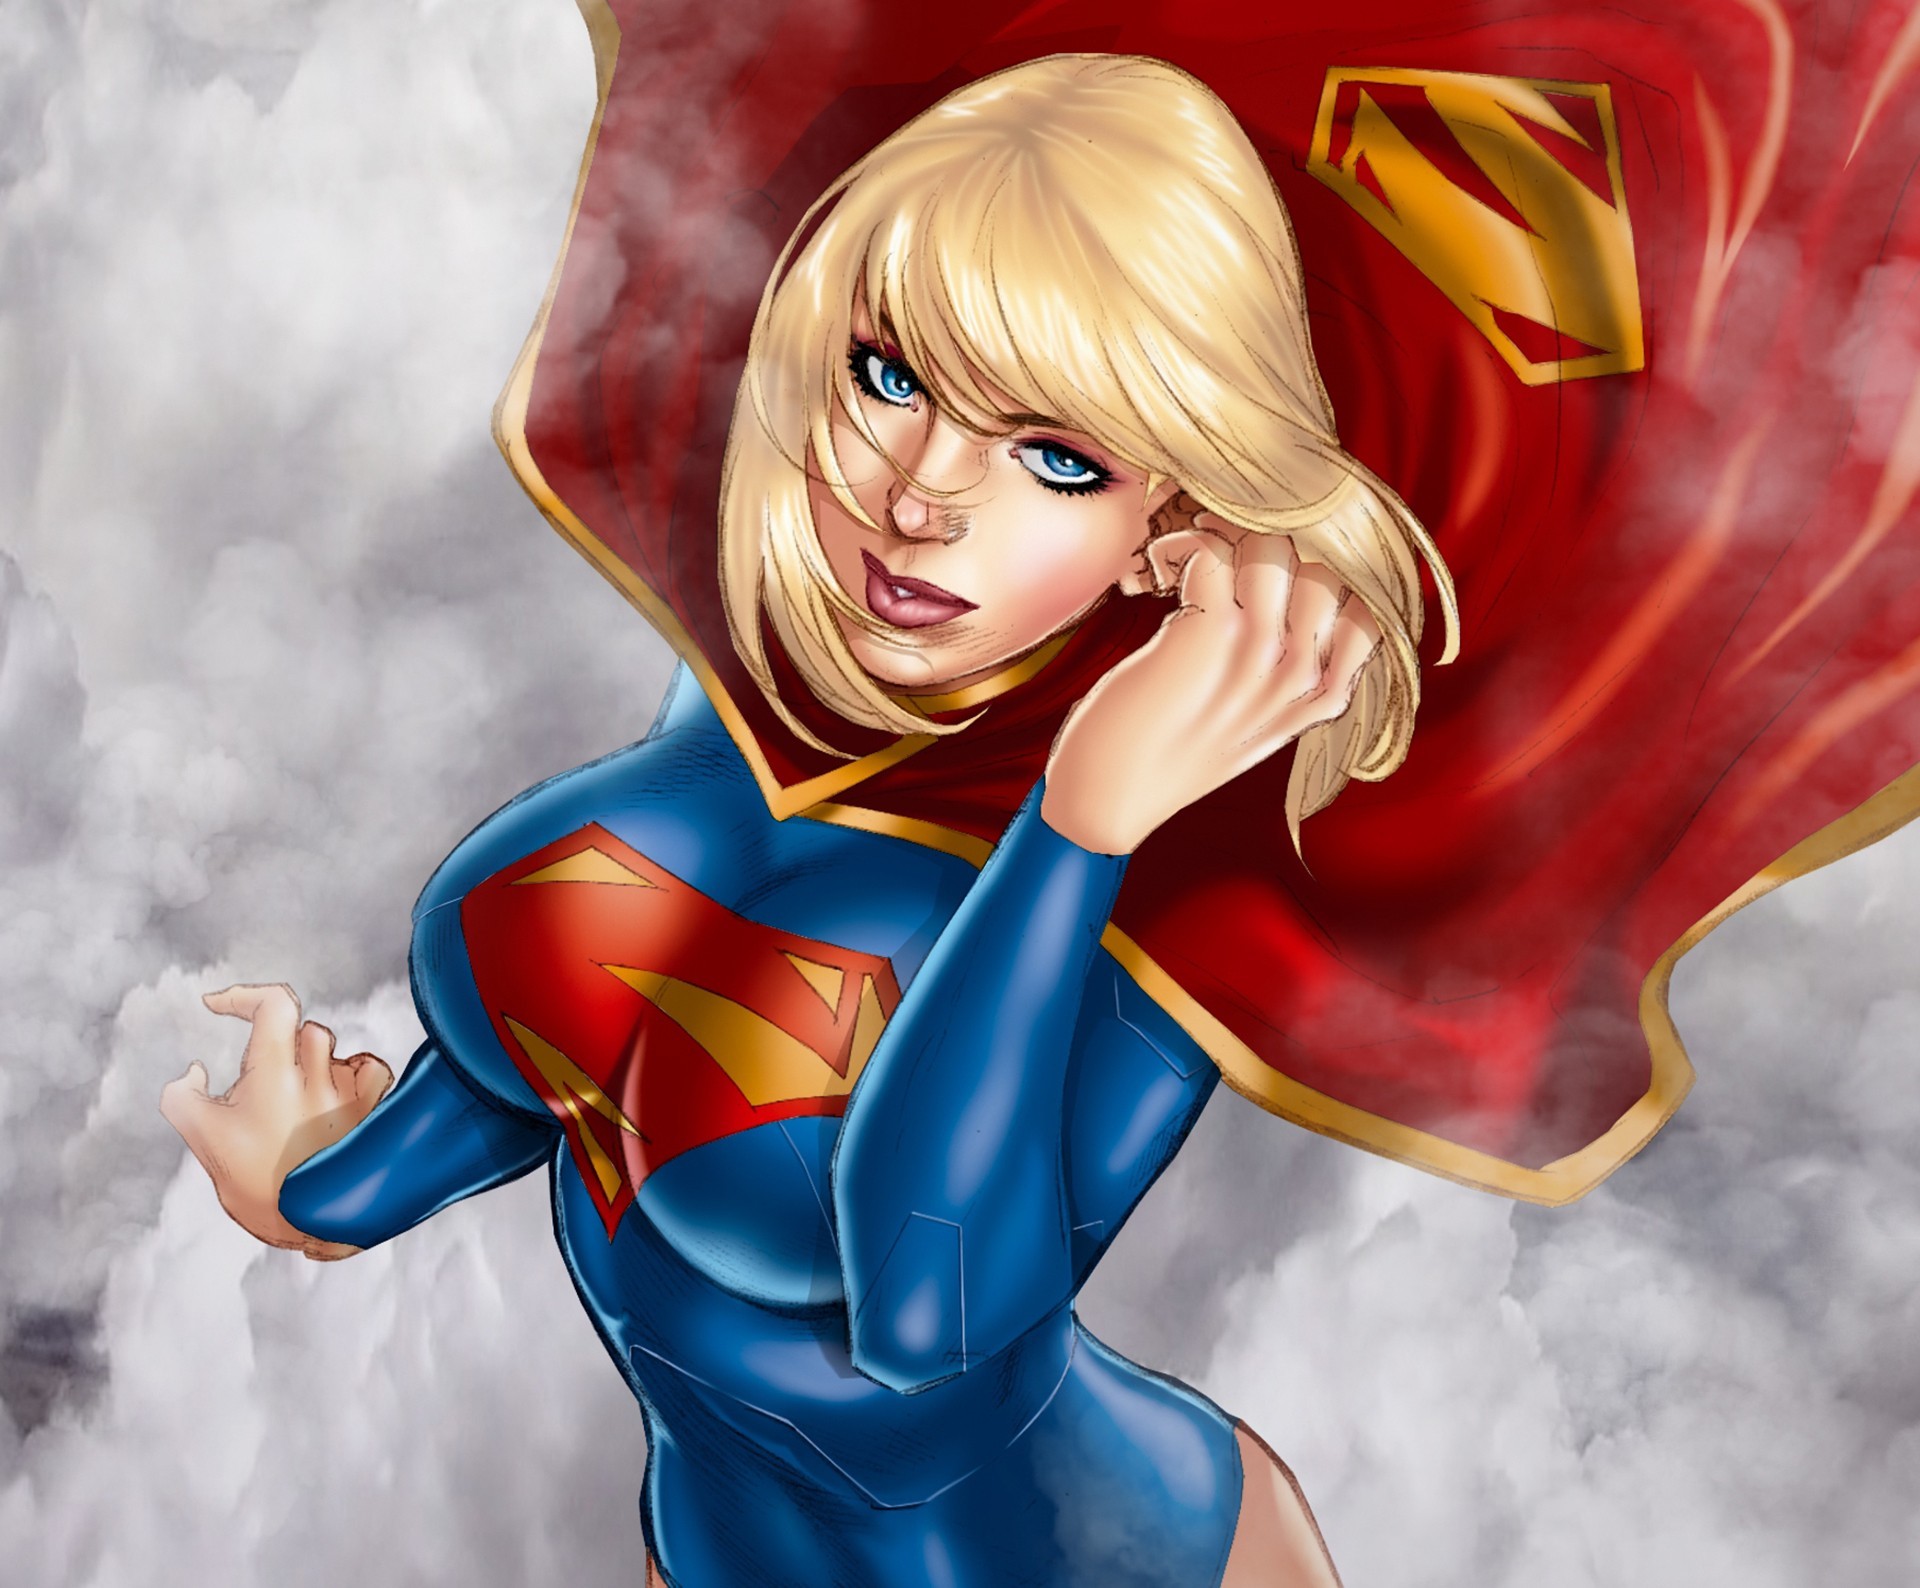 1920x1588 37 Supergirl Wallpapers, HD Quality Supergirl Images, Supergirl .